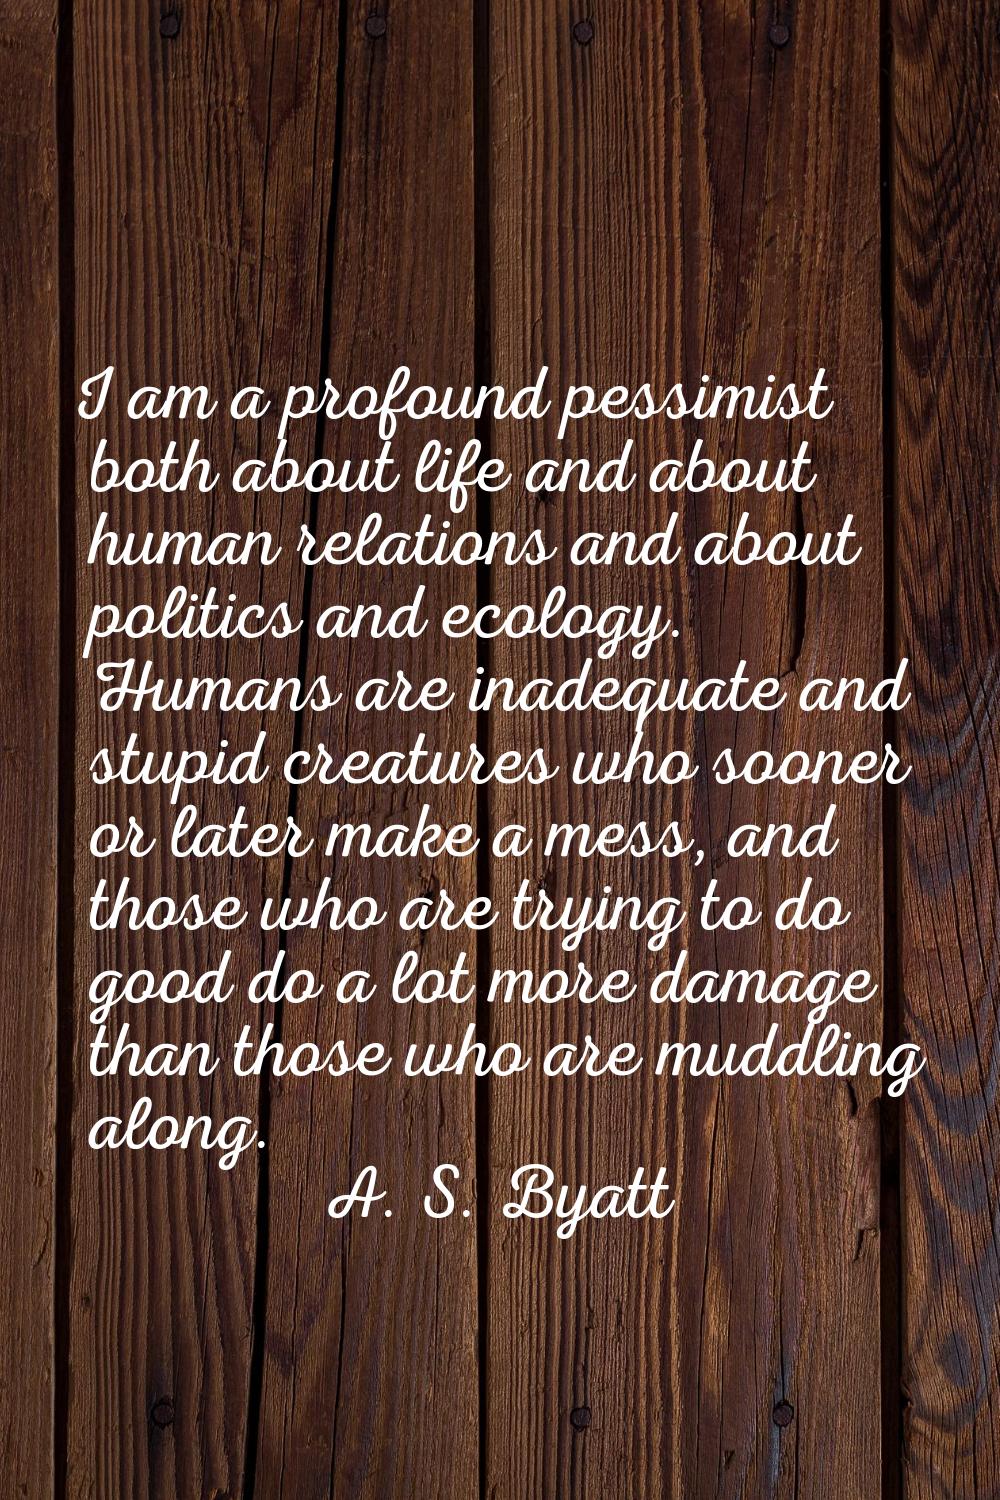 I am a profound pessimist both about life and about human relations and about politics and ecology.